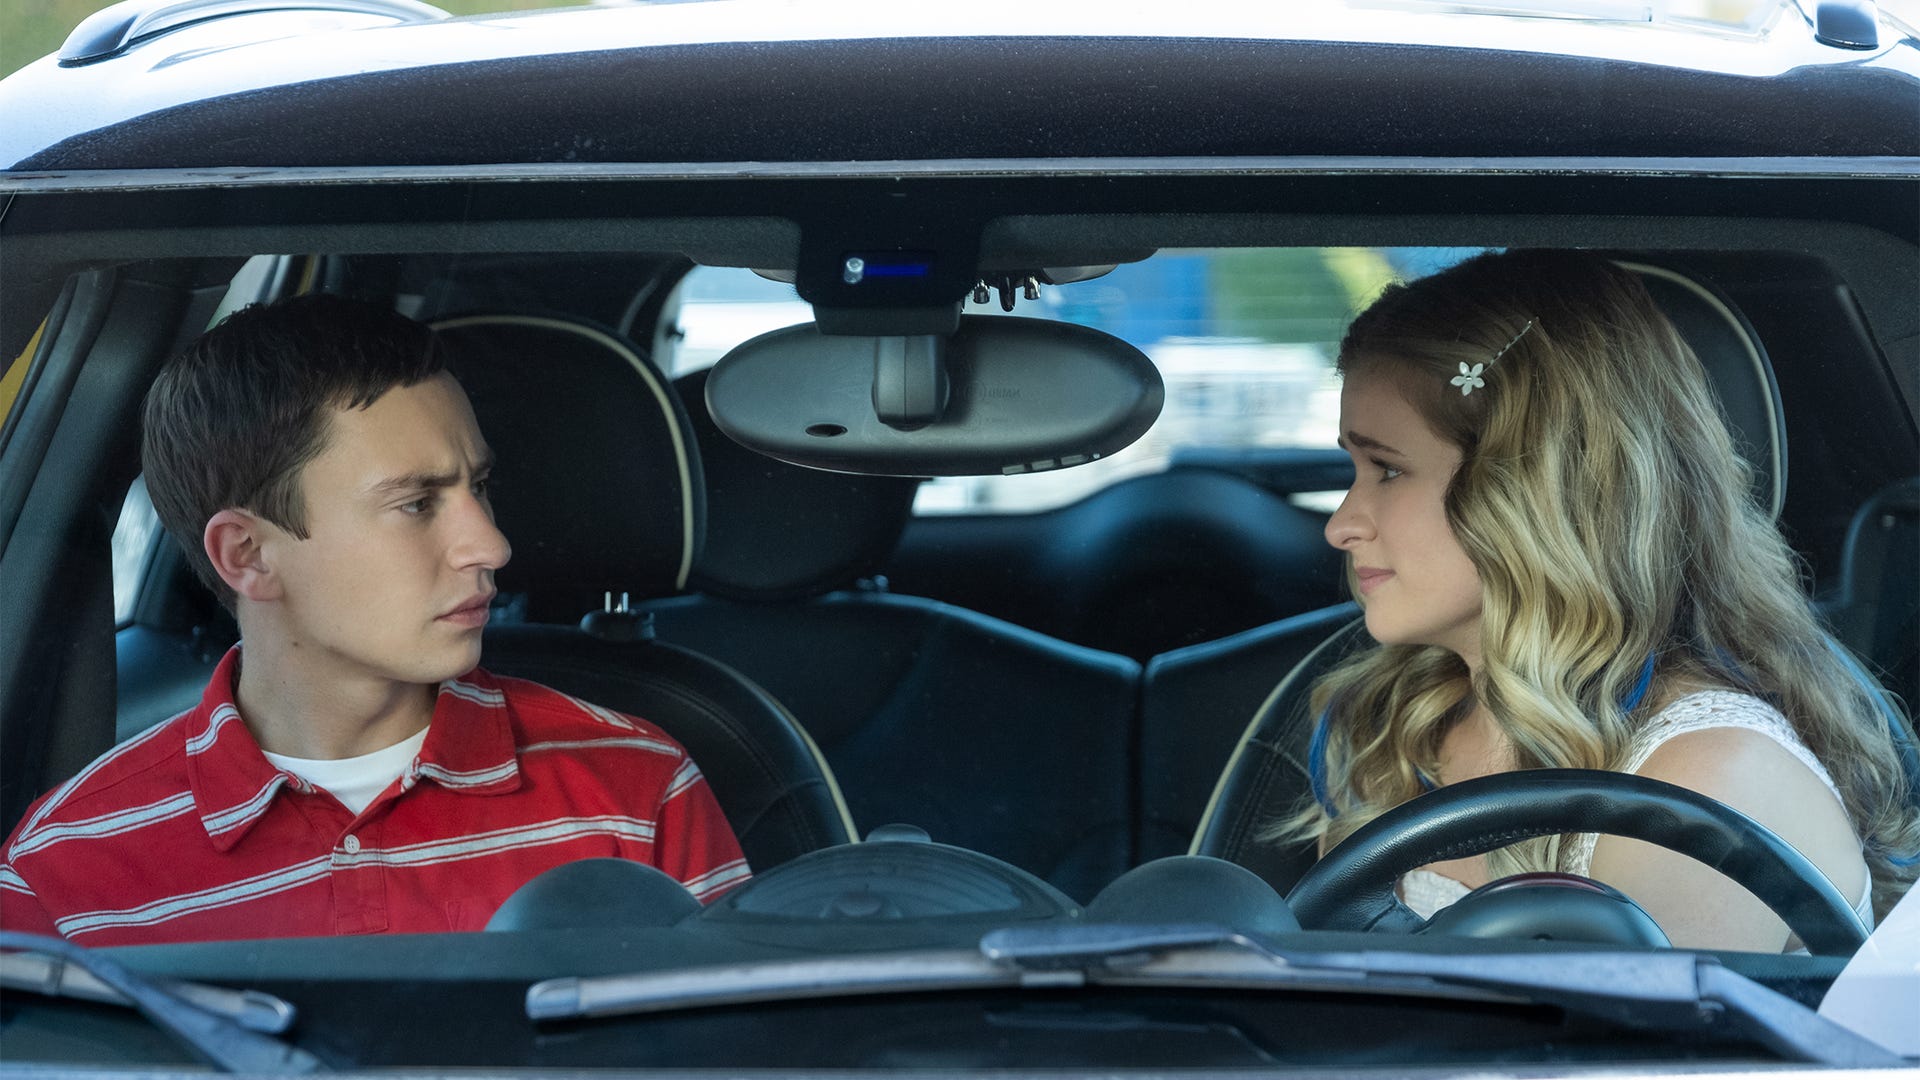 ​Keir Gilchrist and Jenna Boyd, Atypical